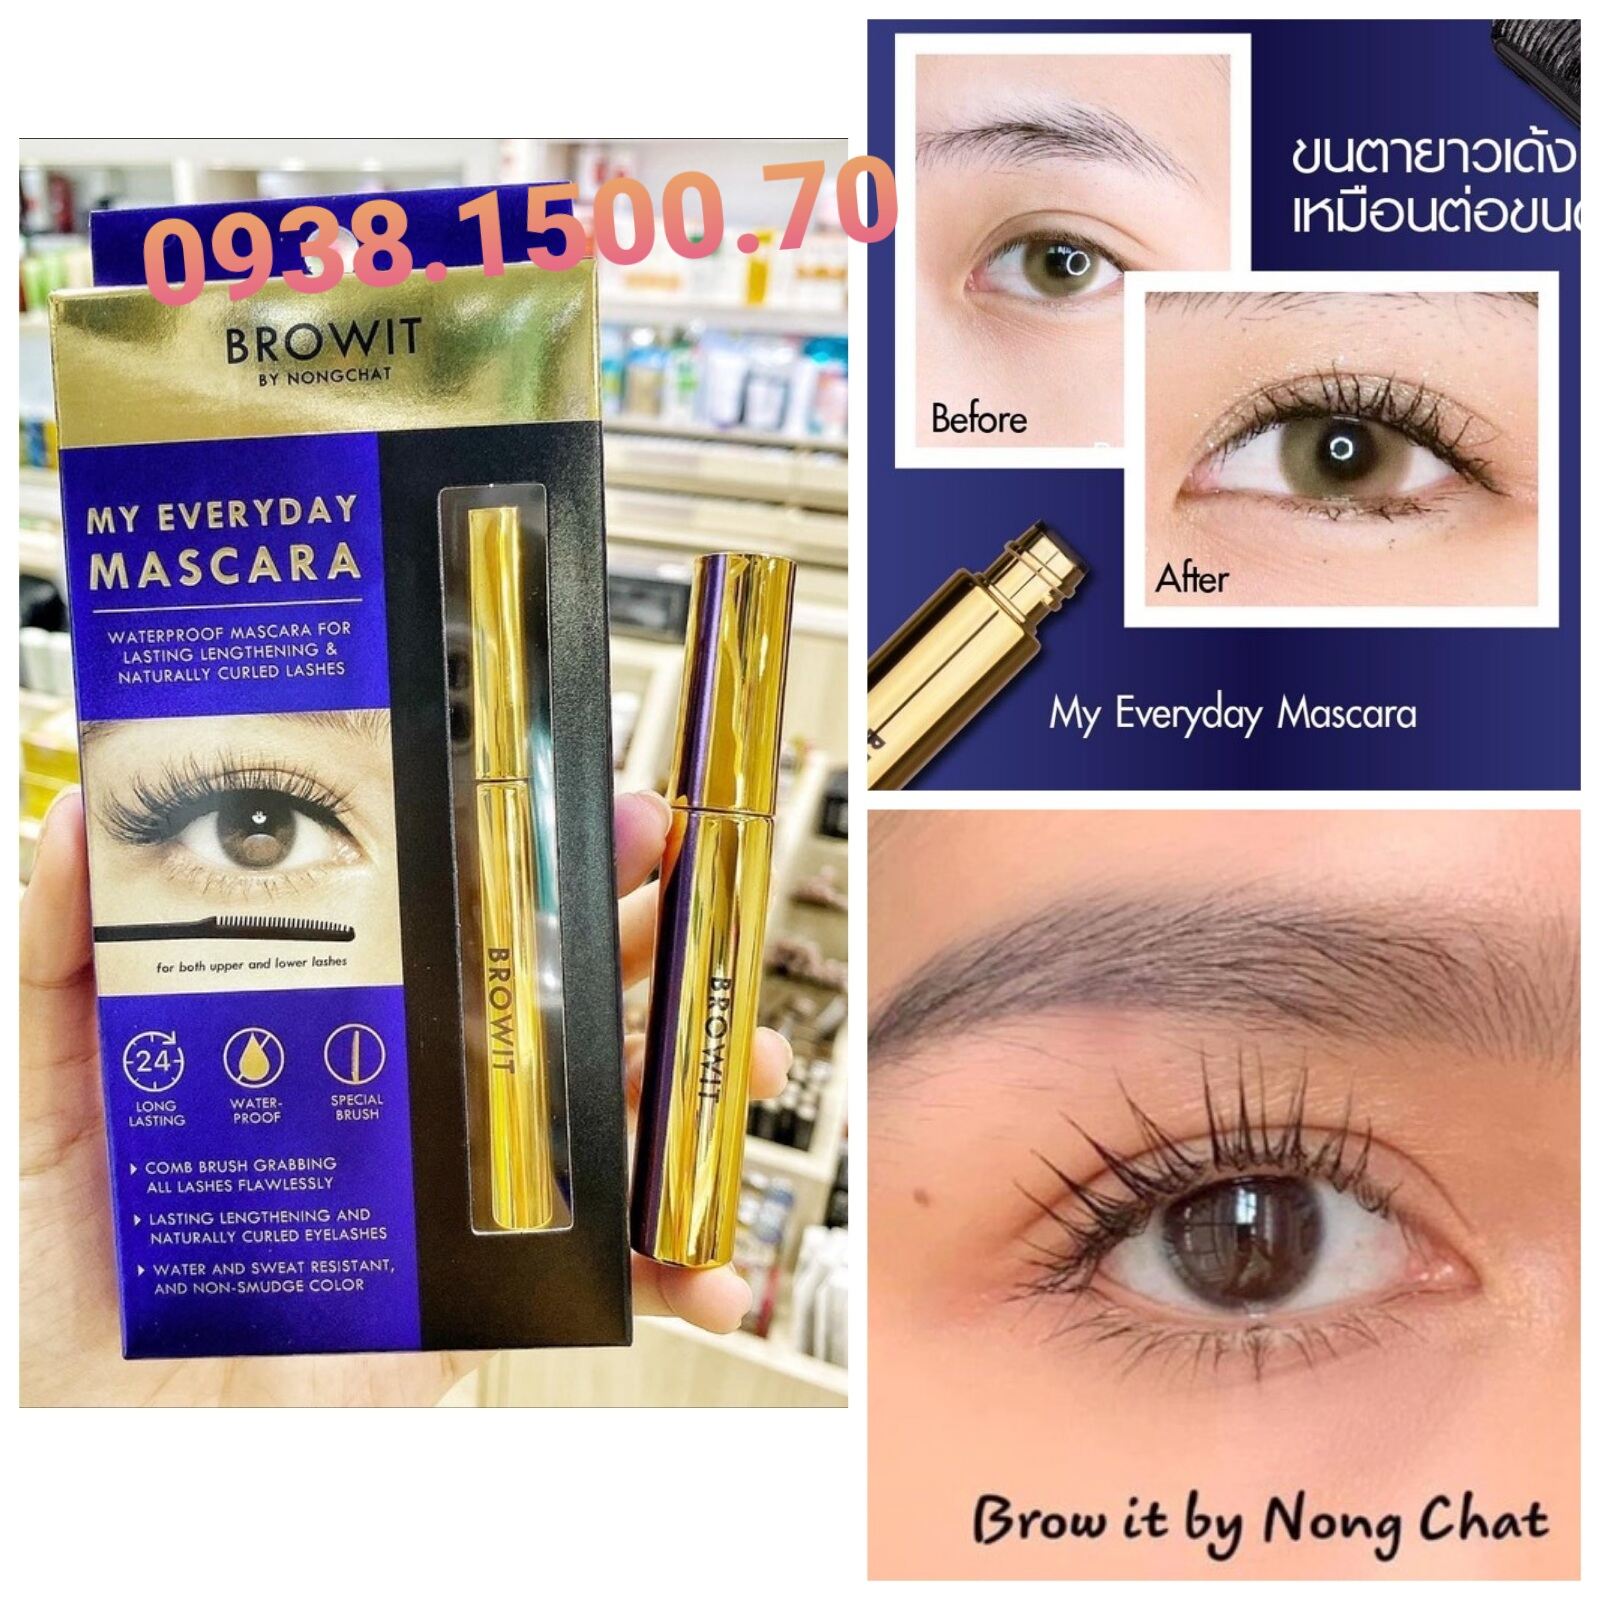 MASCARA CHỐNG NƯỚC CONG MI SUỐT 24H Browit By Nong Chat My Everyday